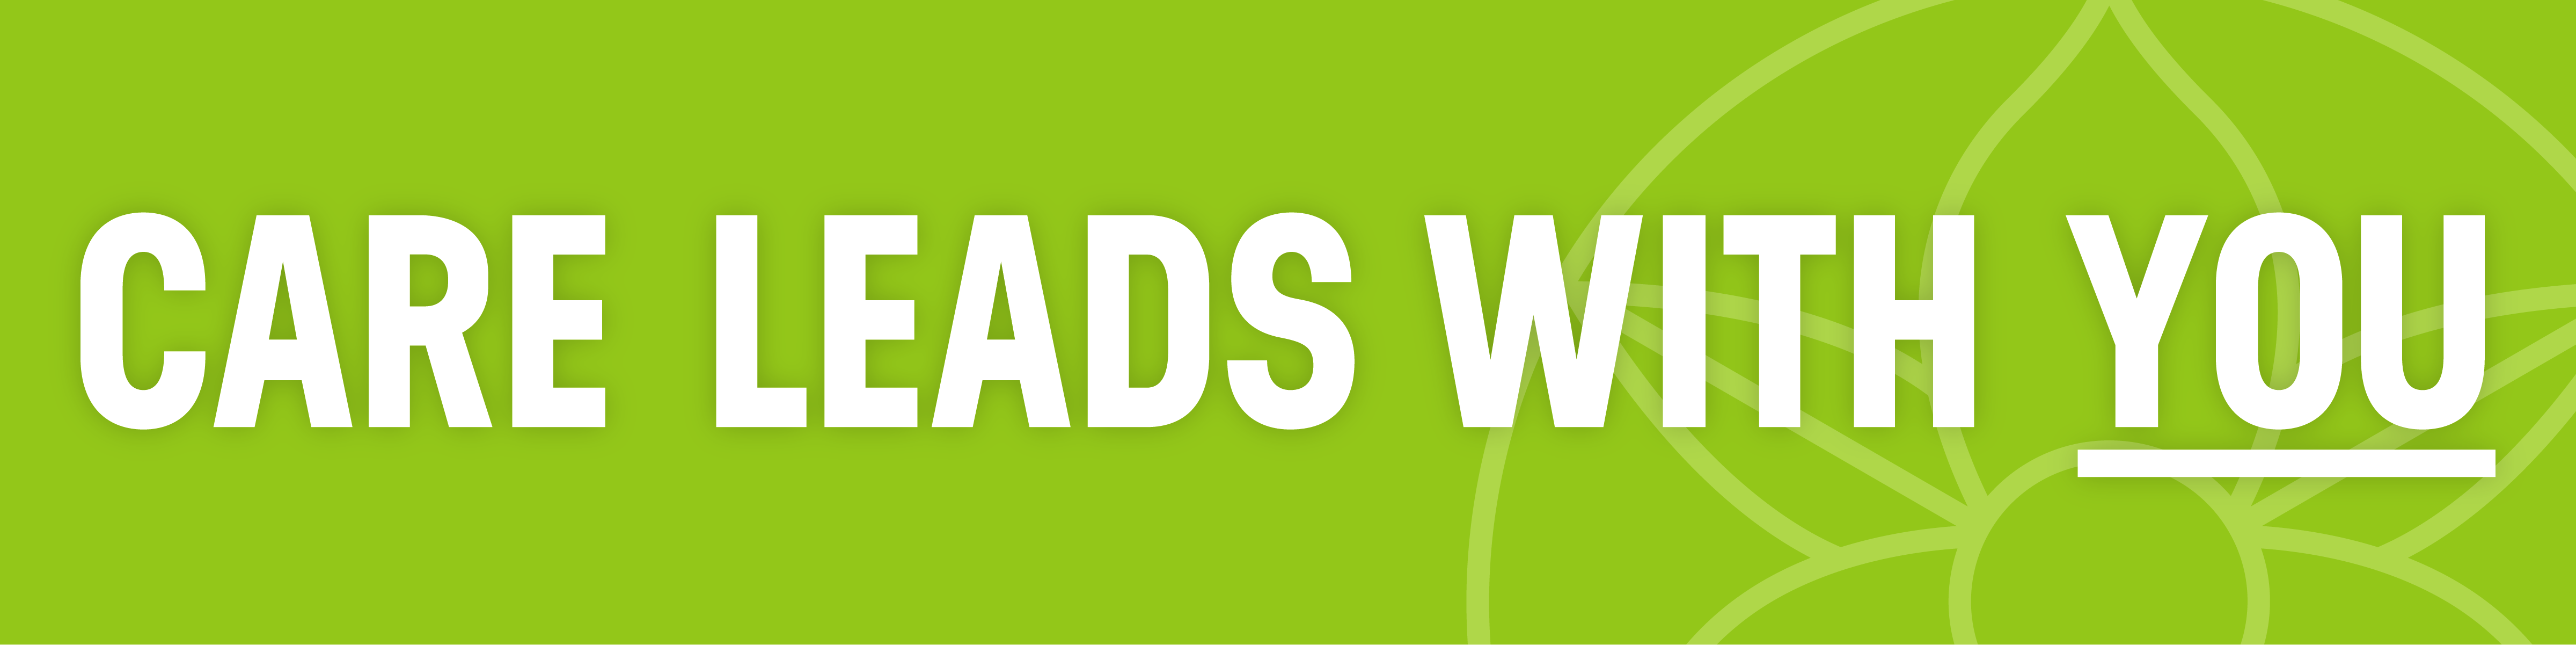 A green banner image with the text "Care Leads With You." The word "You" is underlined.